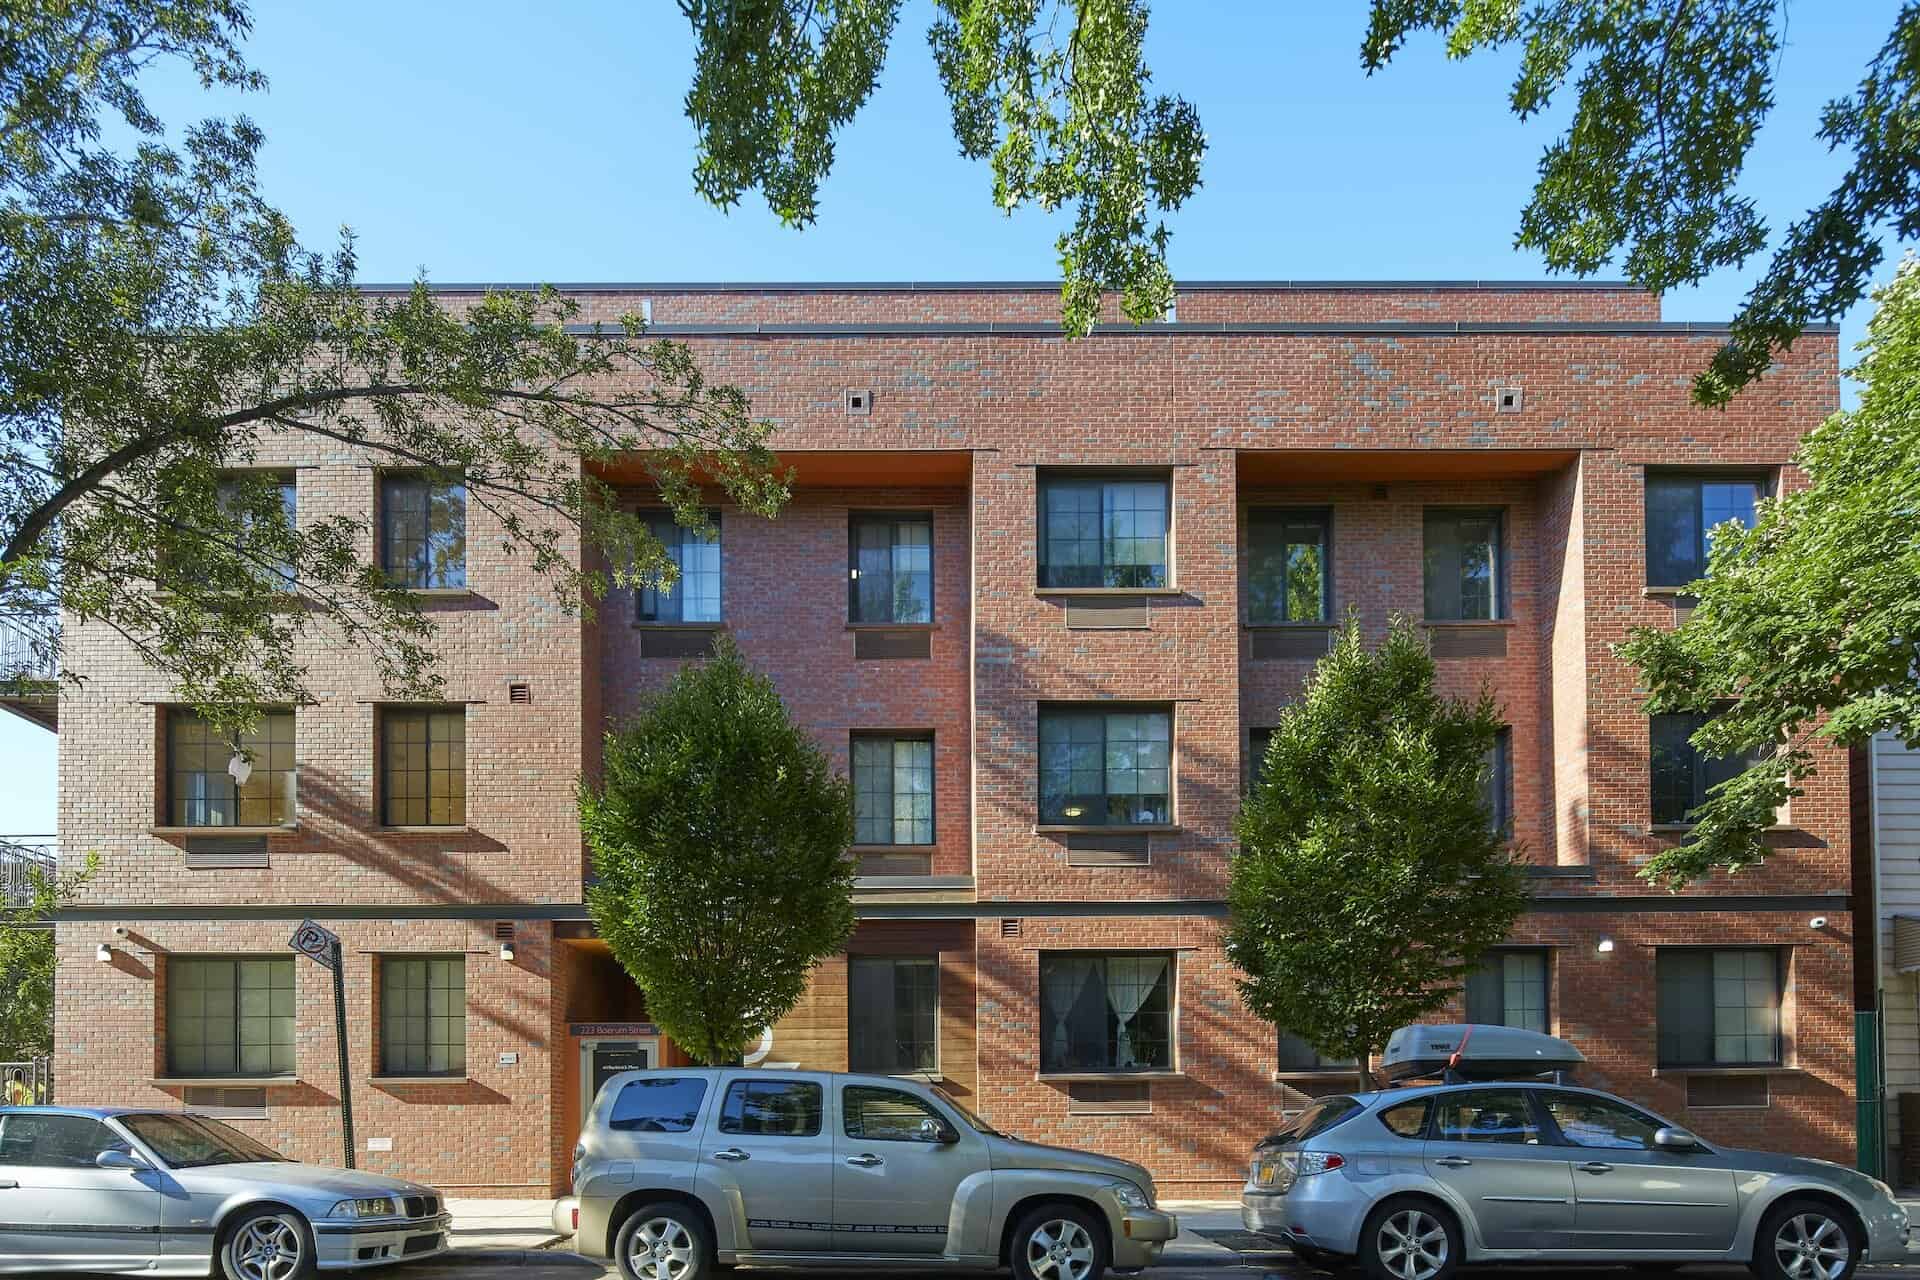 Exterior of 83 Bushwick Place apartments in Brooklyn. Brick residential building with trees and cars parked on the street.